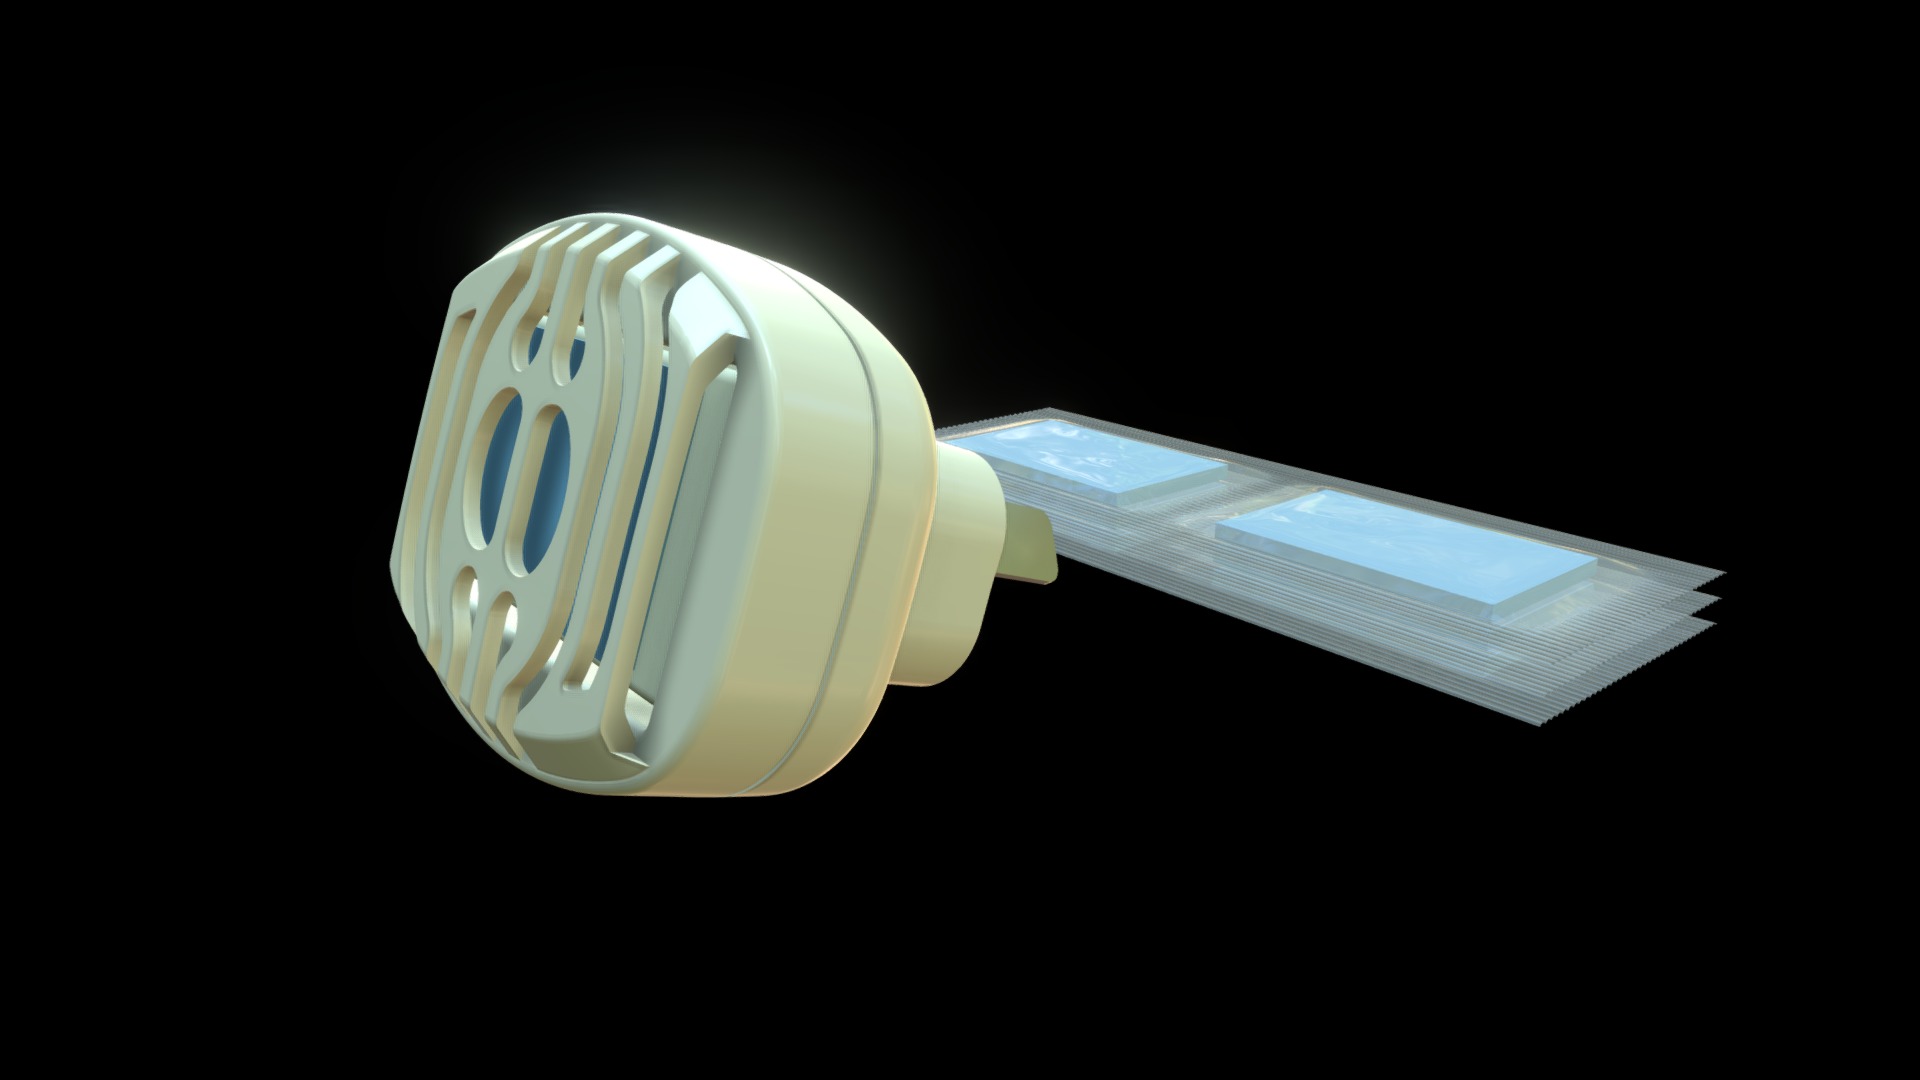 3D model Aparato electrico - This is a 3D model of the Aparato electrico. The 3D model is about a light bulb with a white light.